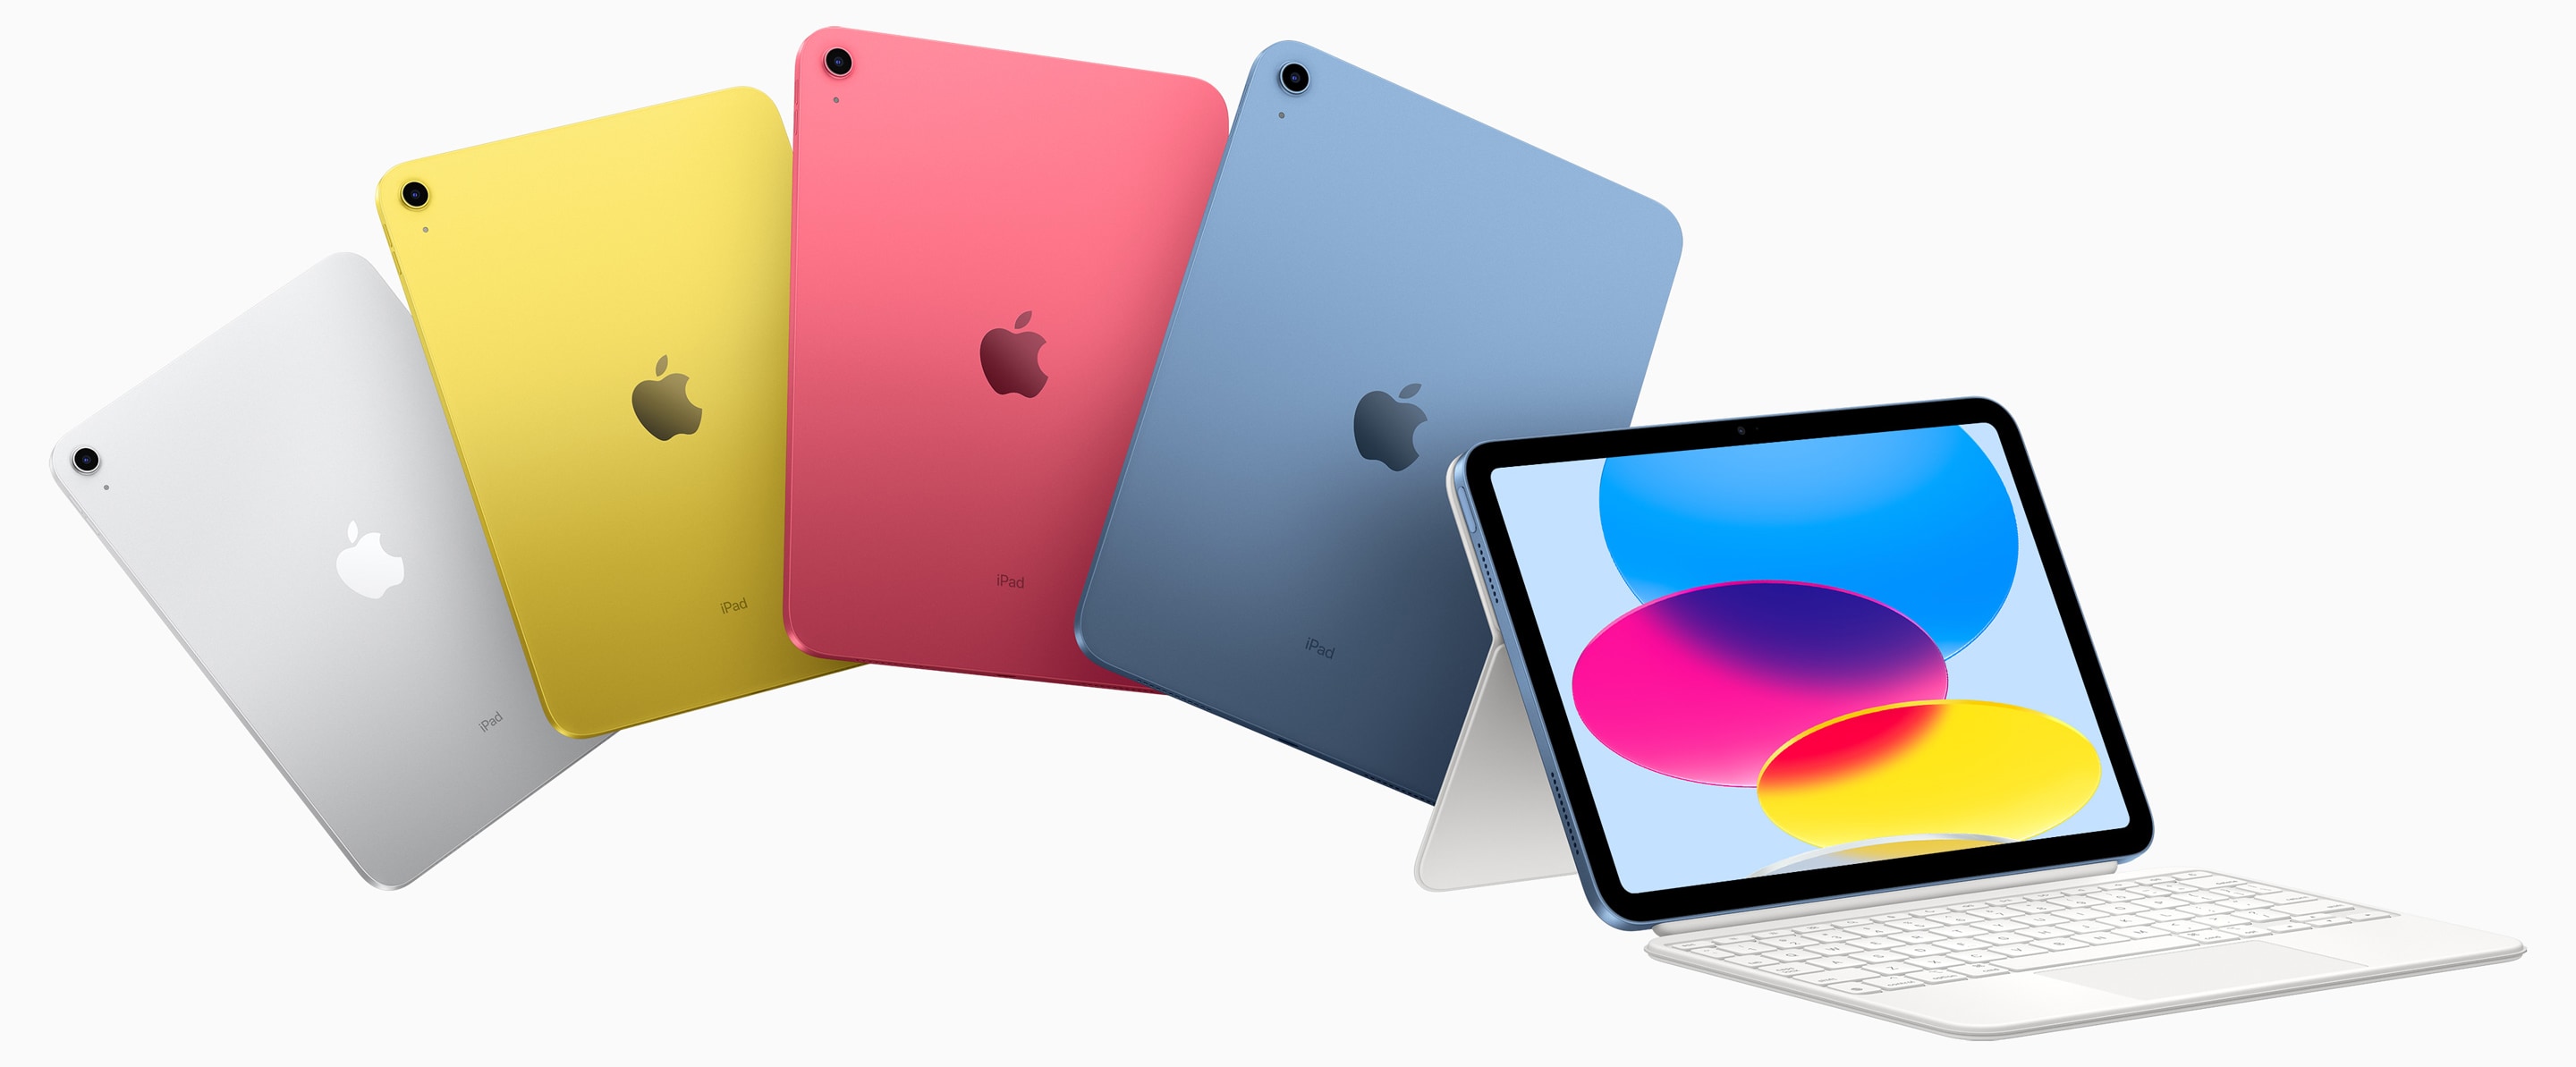 All colors of the tenth-generation iPad are showcases on this marketing image from Apple